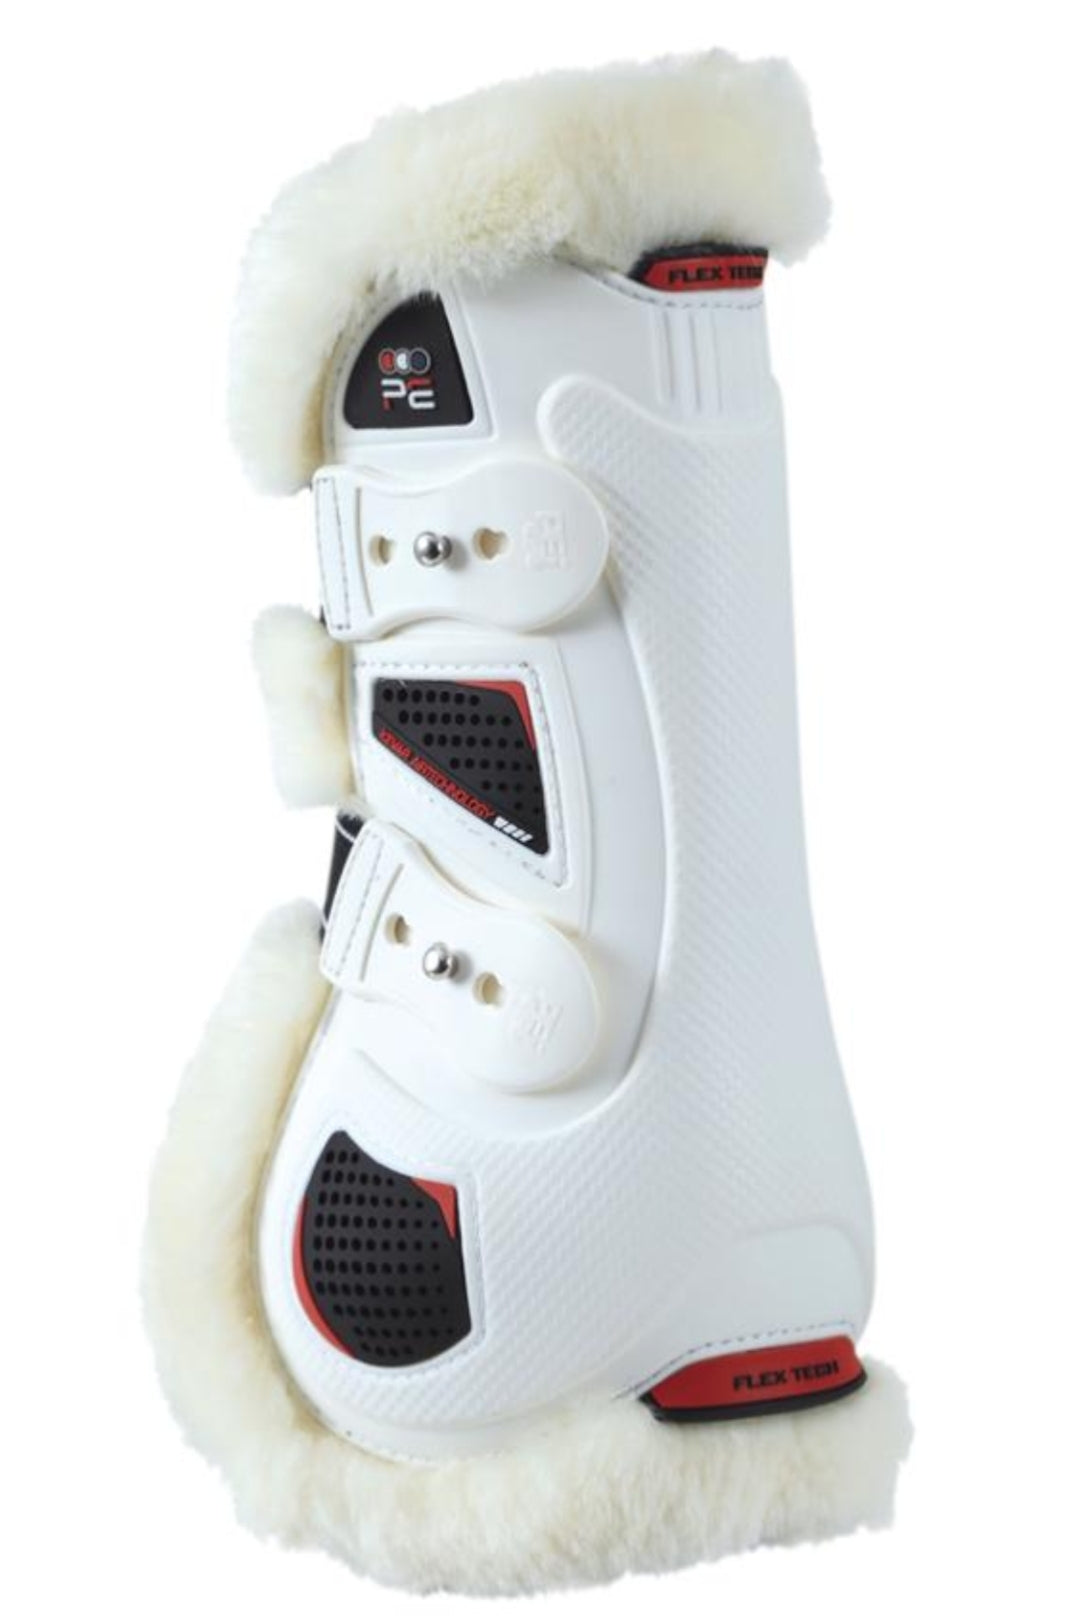 Premier Equine Techno Wool Tendon Boots - Robyn's Tack Room 